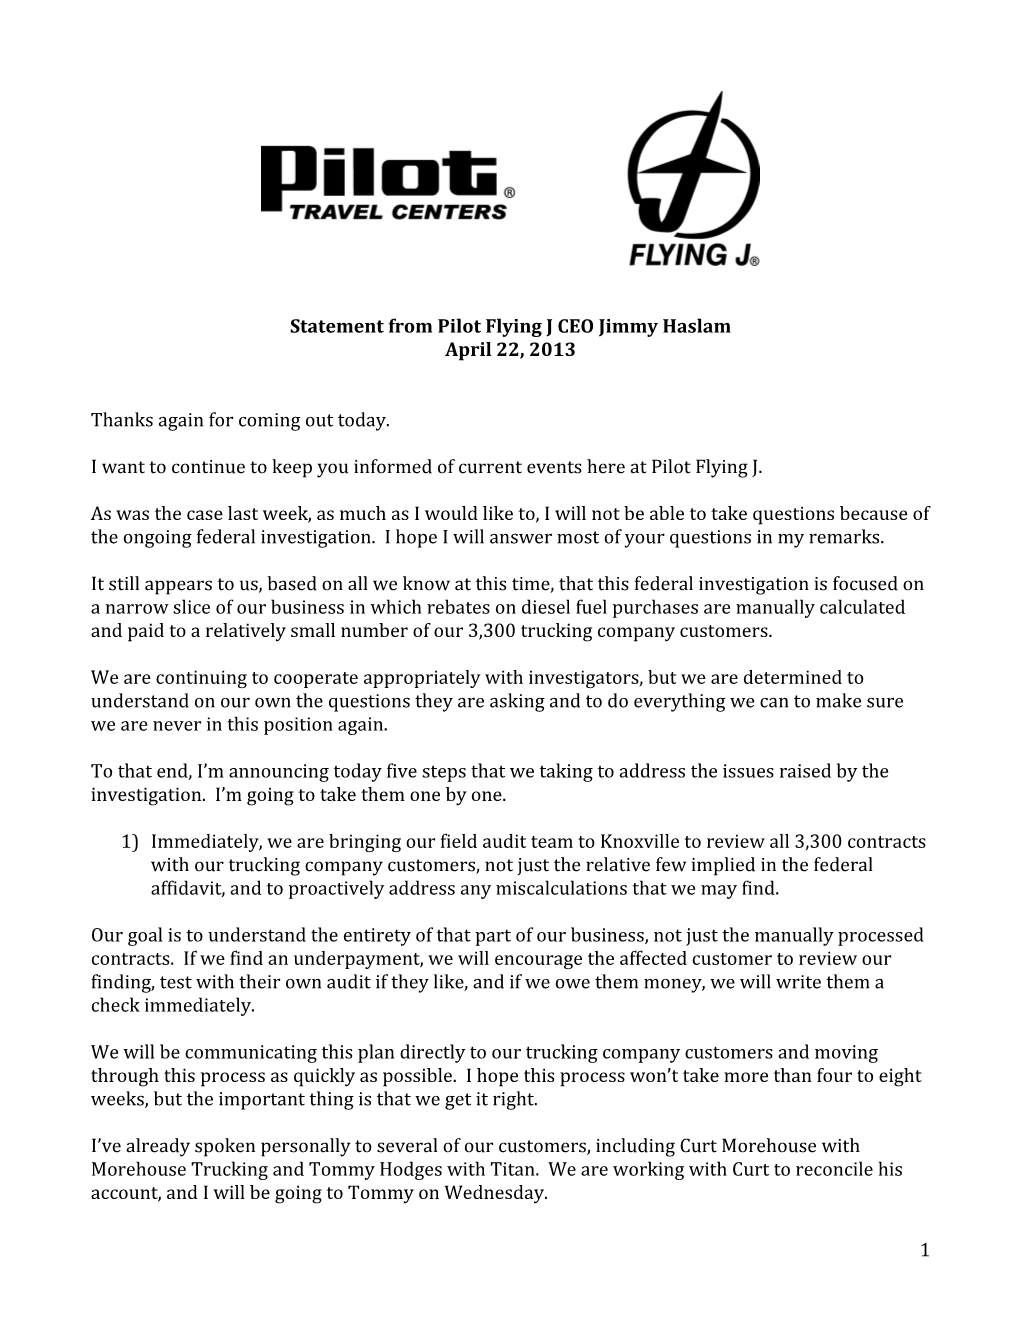 Statement from Pilot Flying J CEO Jimmy Haslam